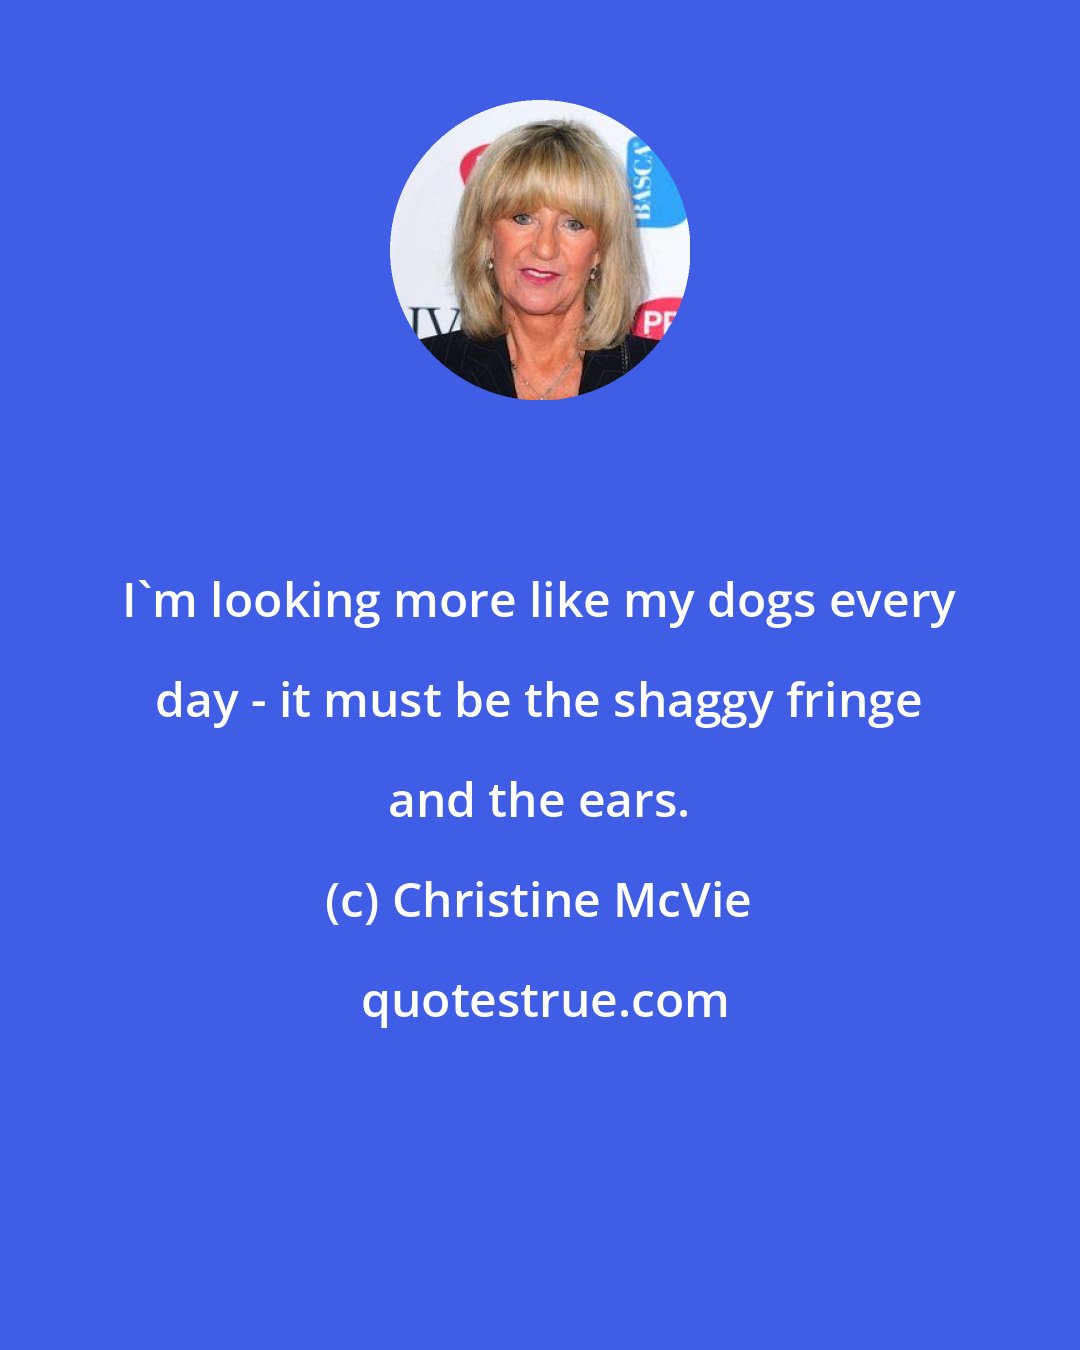 Christine McVie: I'm looking more like my dogs every day - it must be the shaggy fringe and the ears.